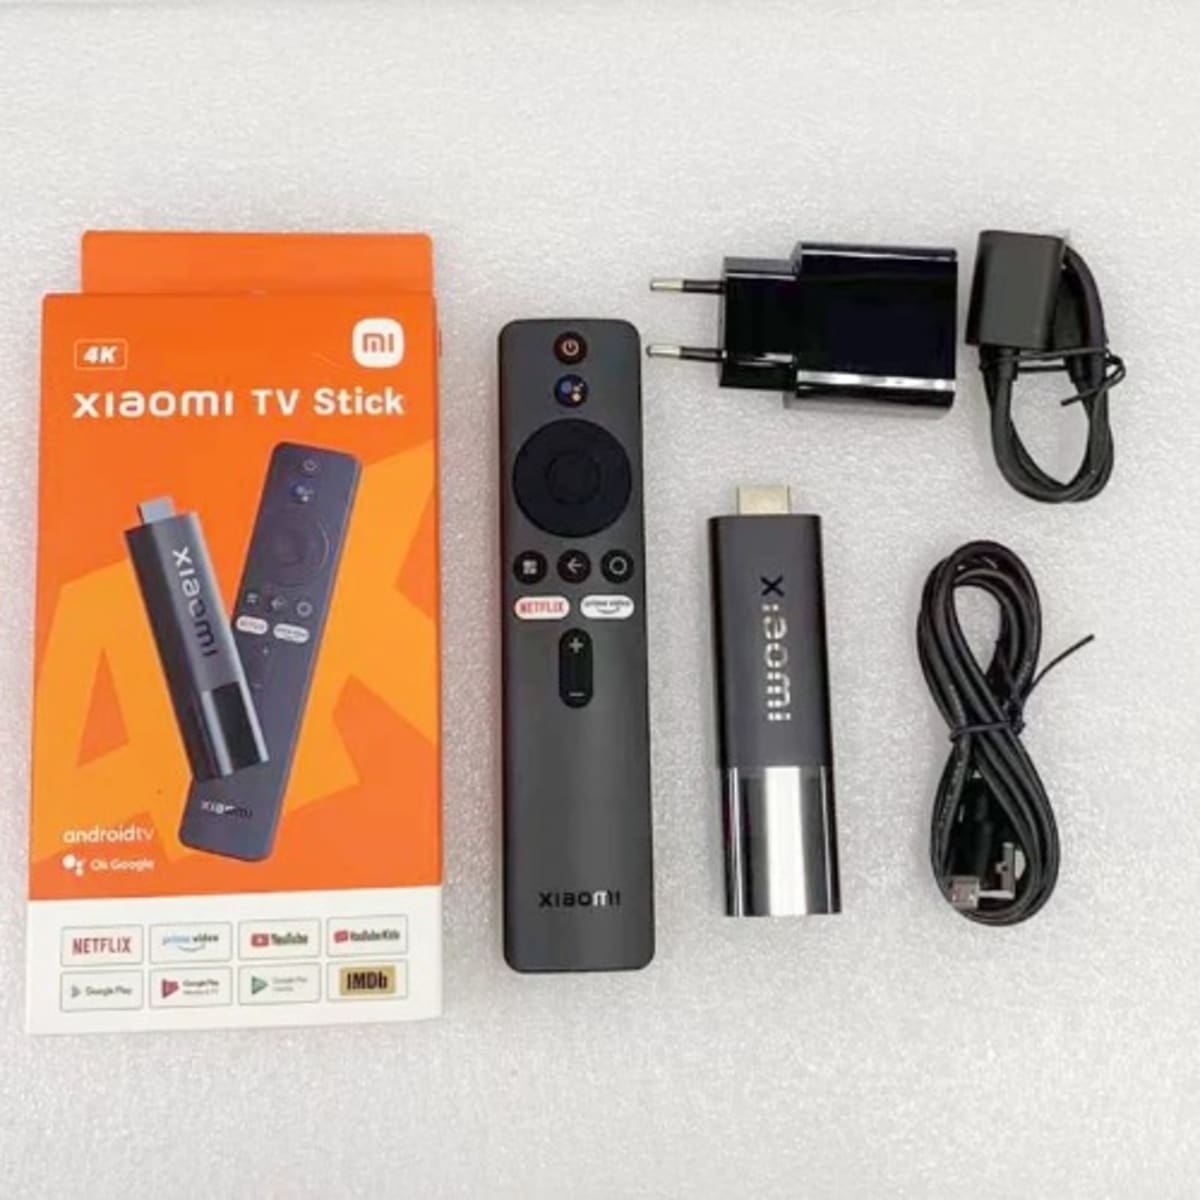 Review: Xiaomi Mi TV Stick delivers Android TV on the cheap